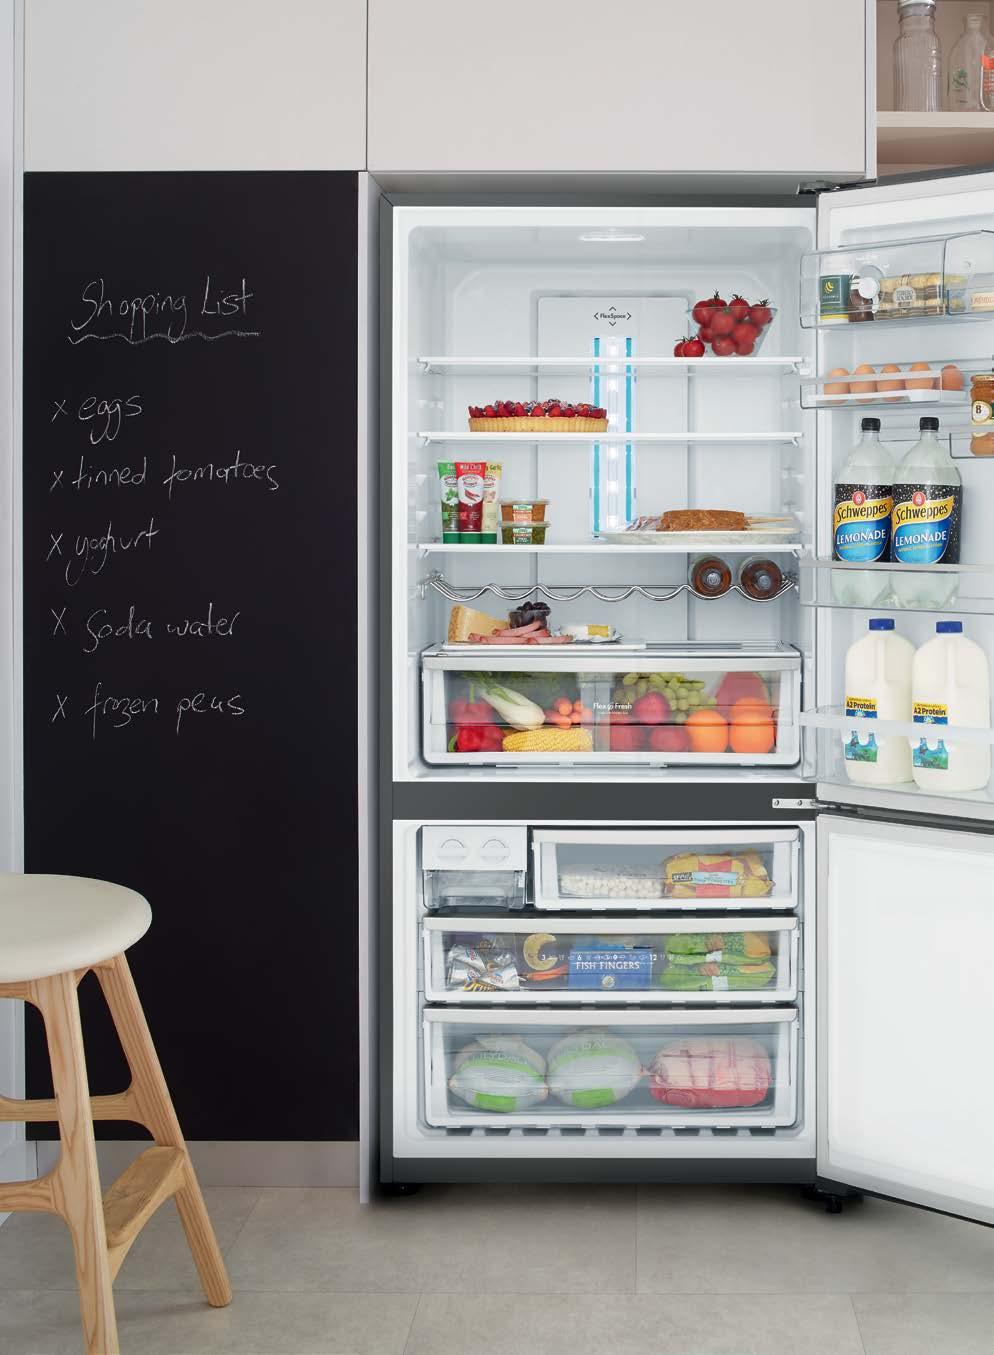 Choose the right fridge with estinghouse A fridge is a vital part of every home, but with so many to choose from it can be difficult to know which one is right for your family.